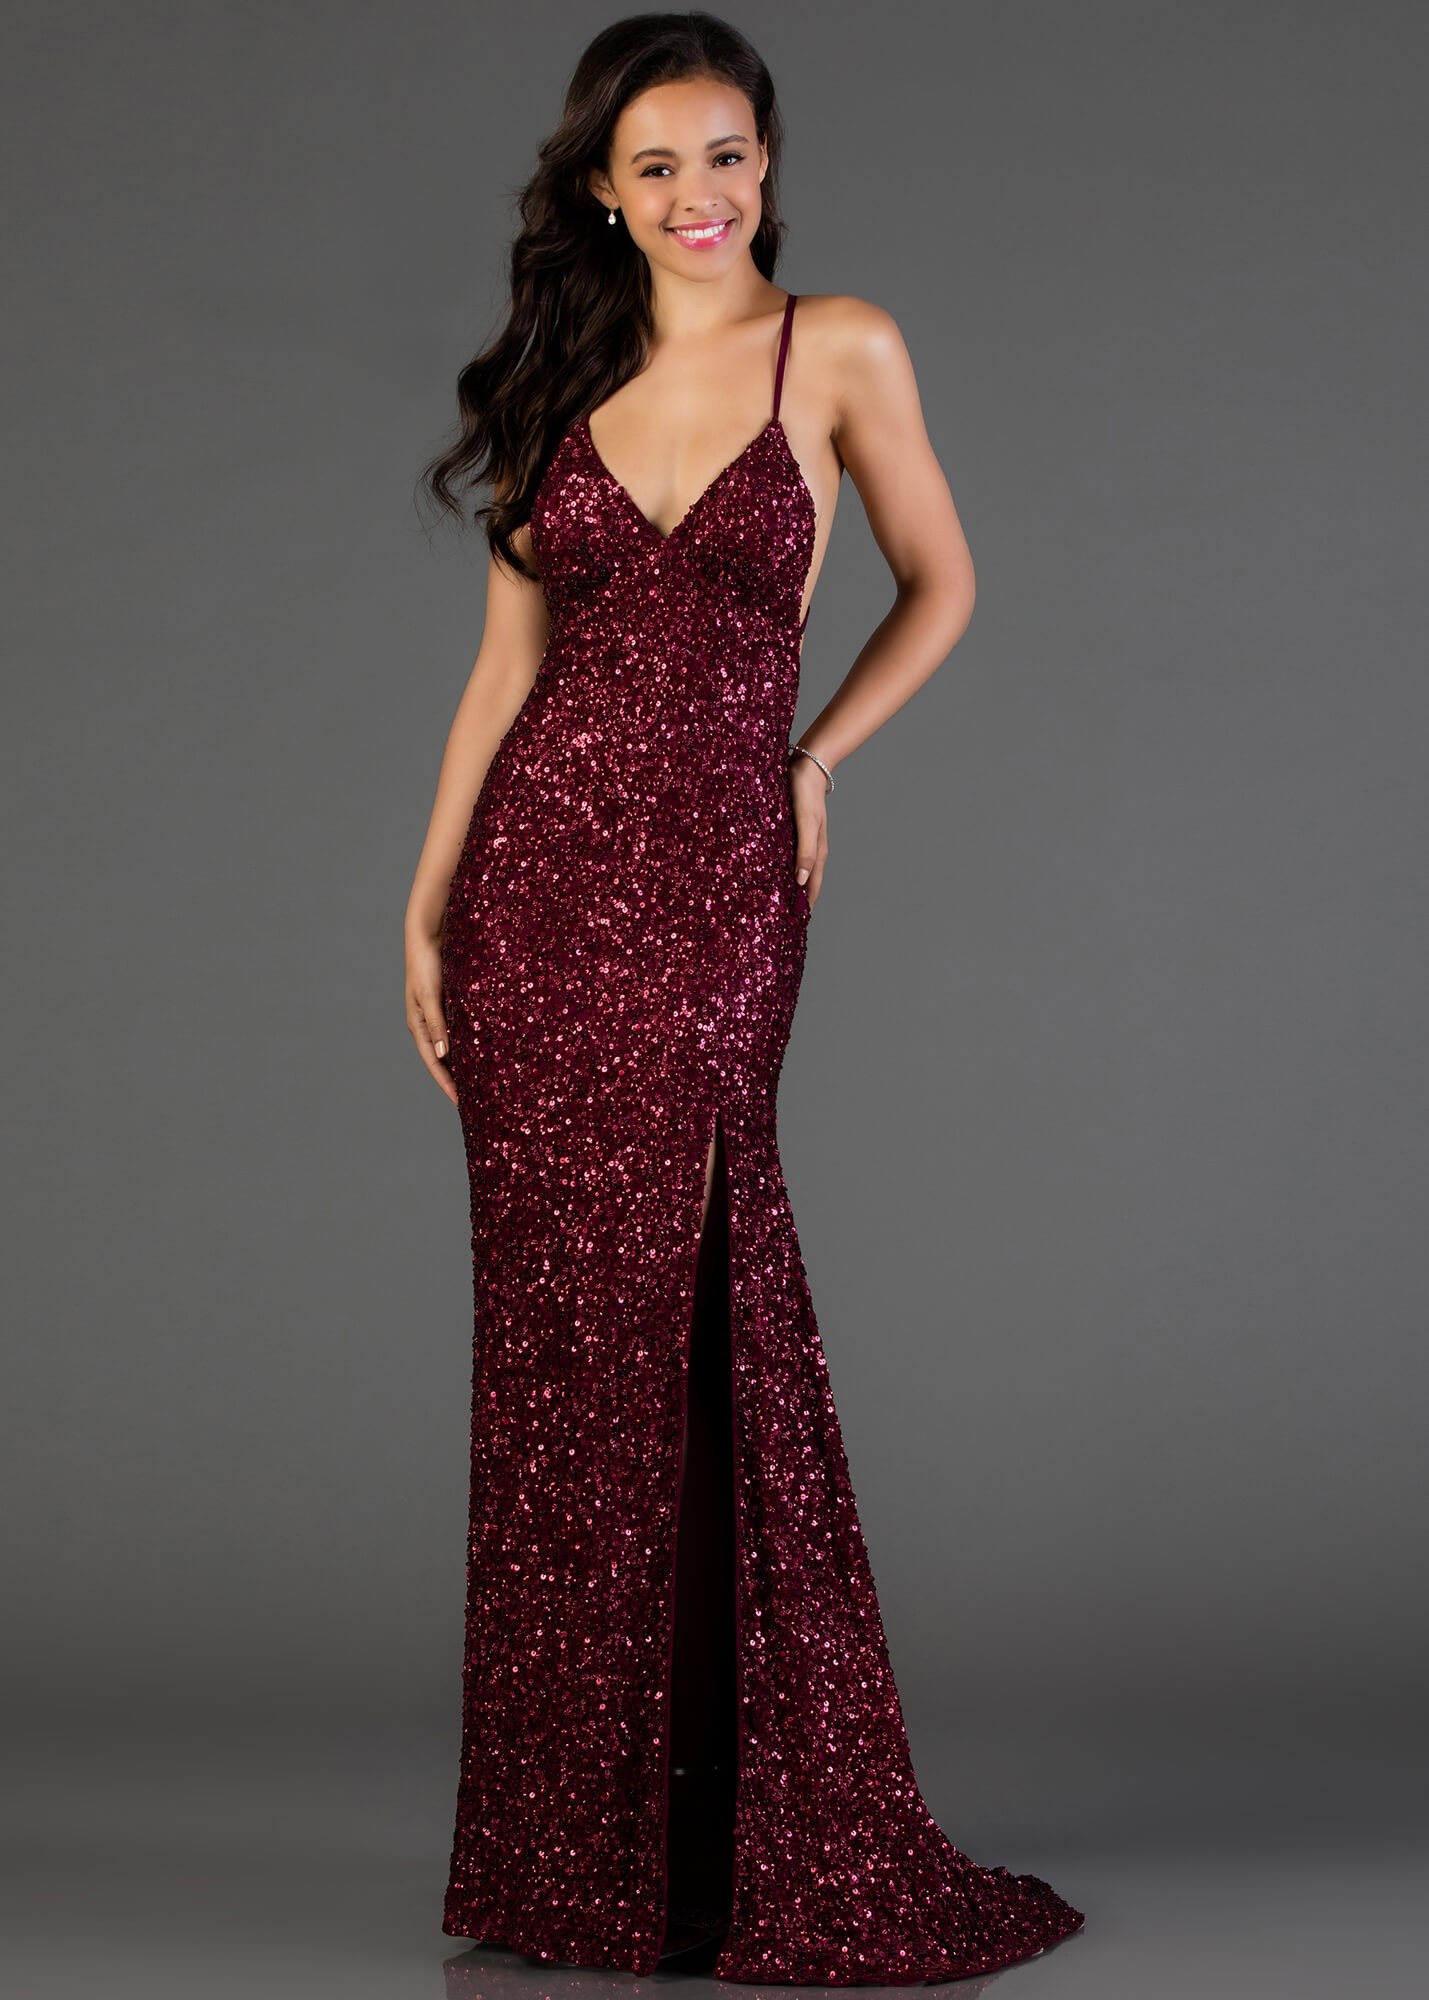 Scala 48938 V-Neck Sequin Gown with Slit | RissyRoos.com